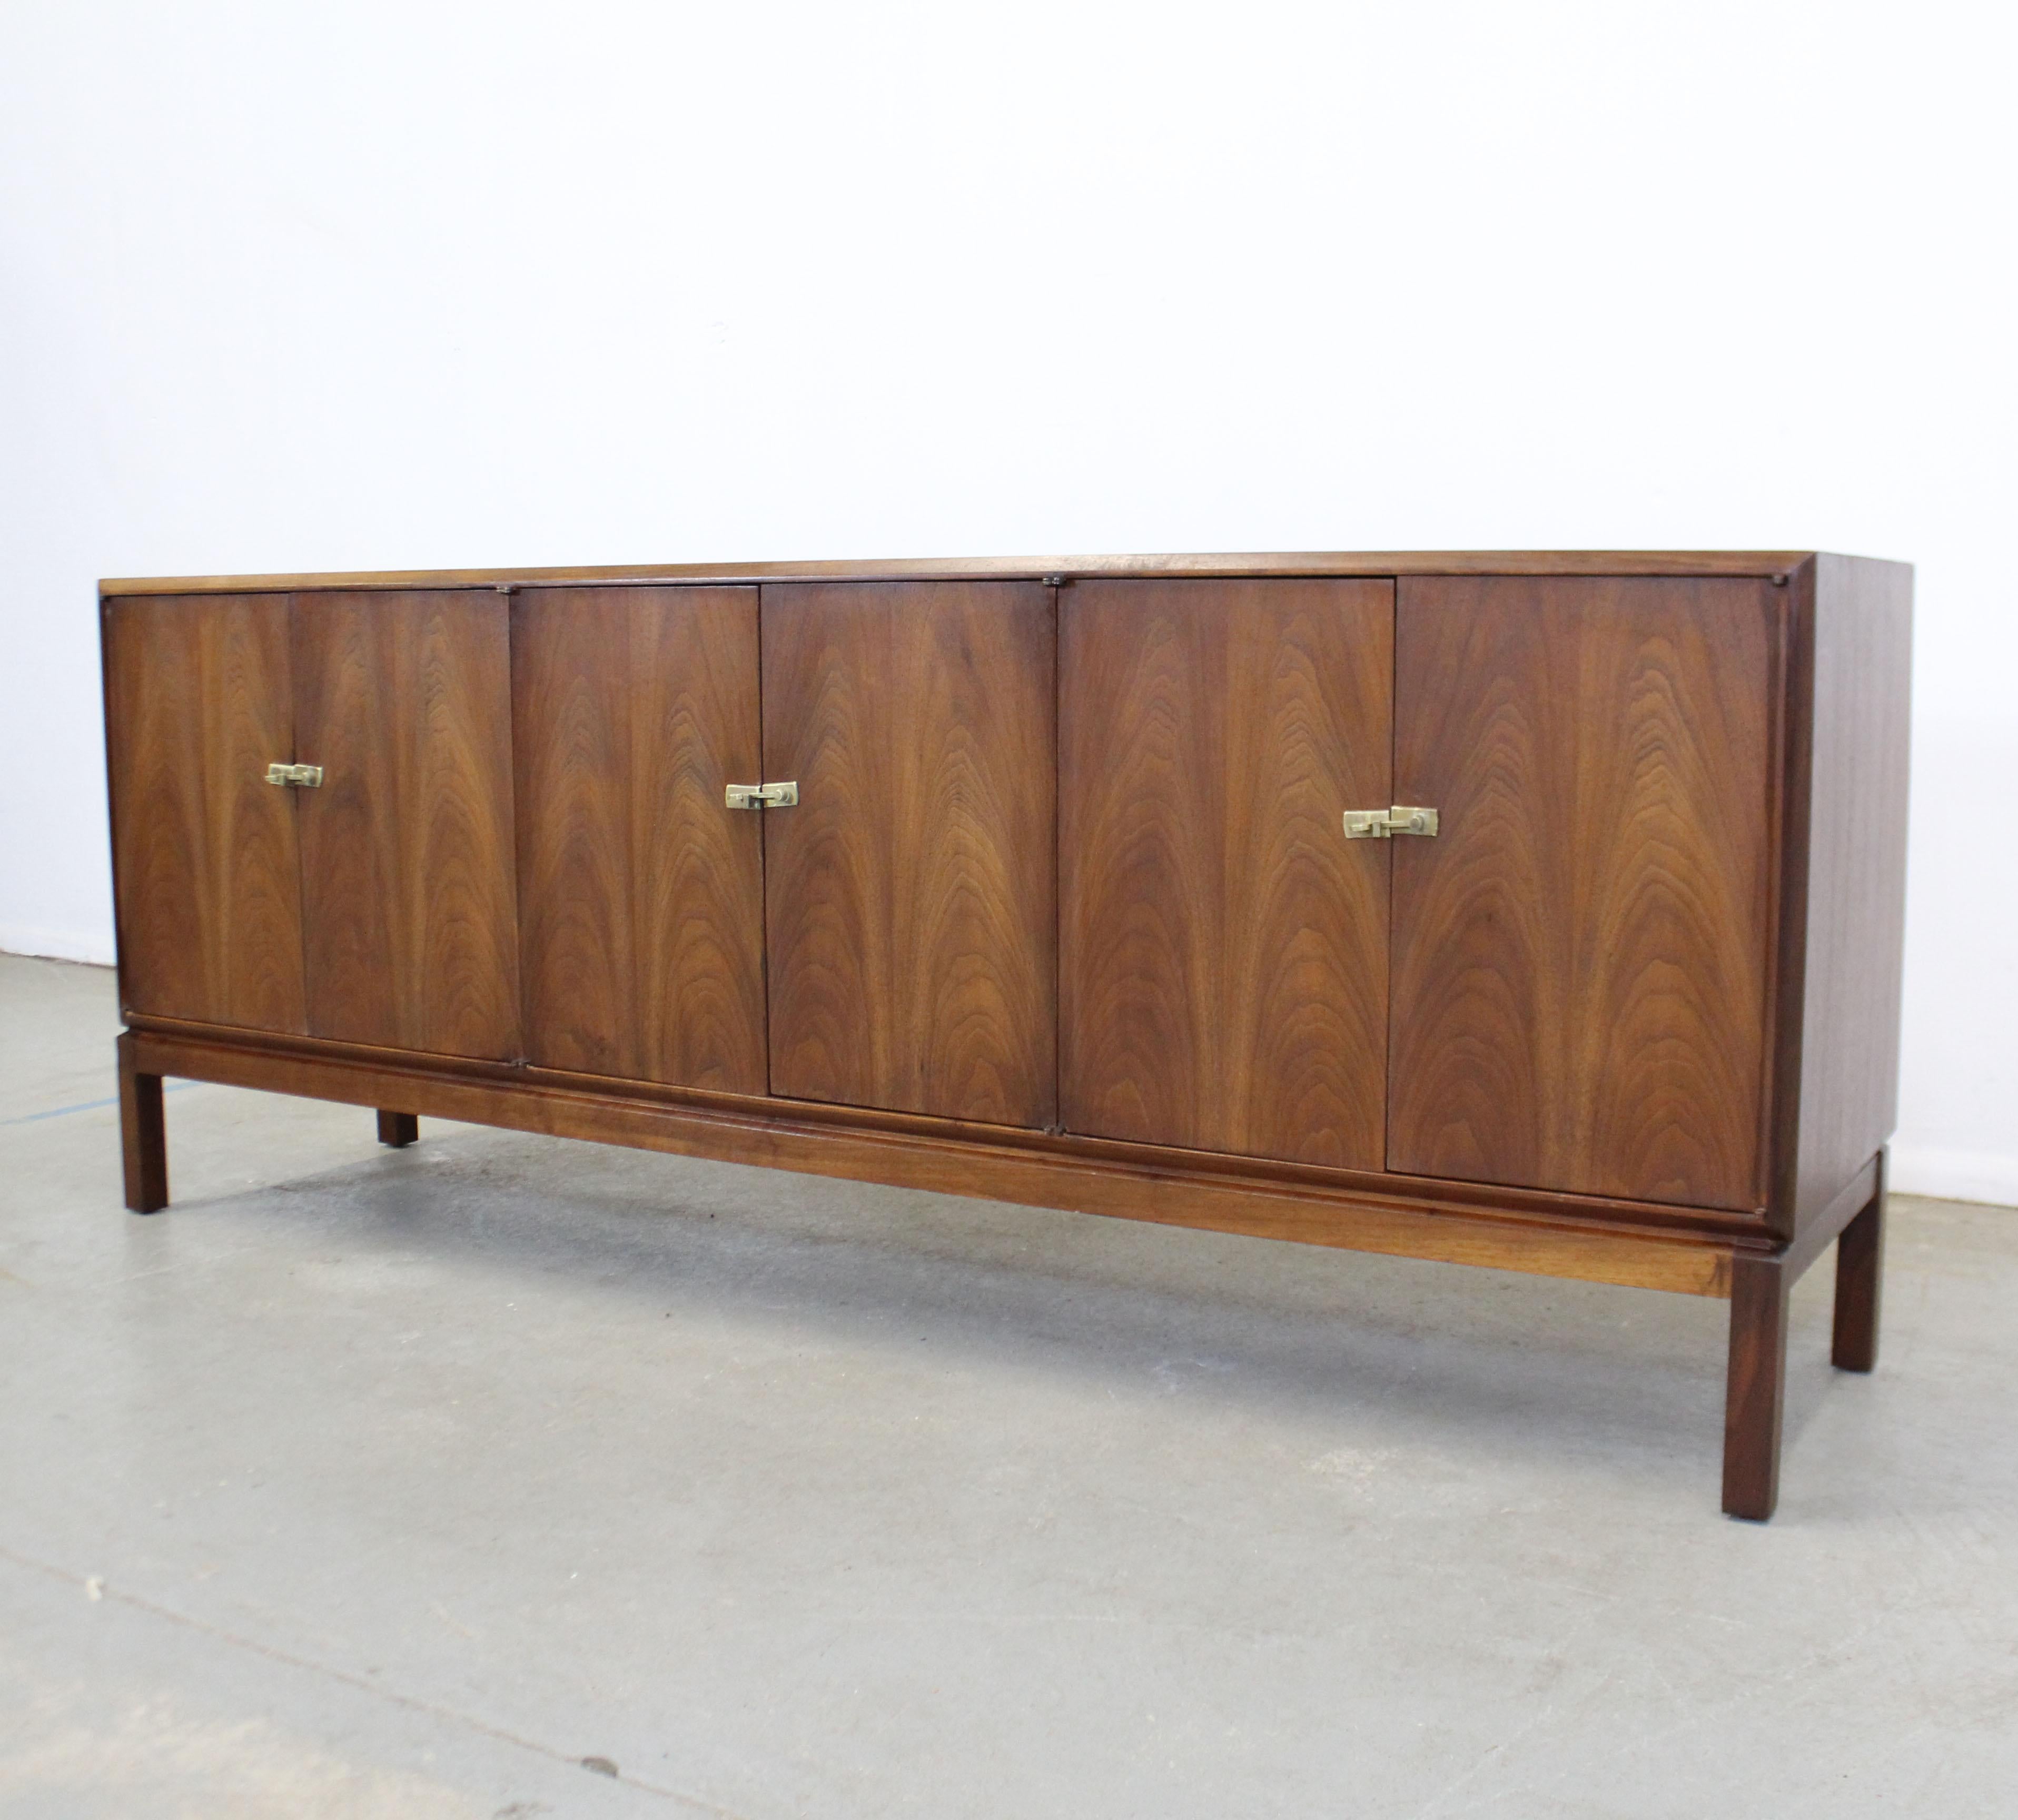 Offered is a restored American Mid-Century Modern walnut credenza. The simple design is embellished with brass latches along the door fronts. Includes inner shelving and two center drawers. It is in excellent vintage condition, has been refinished